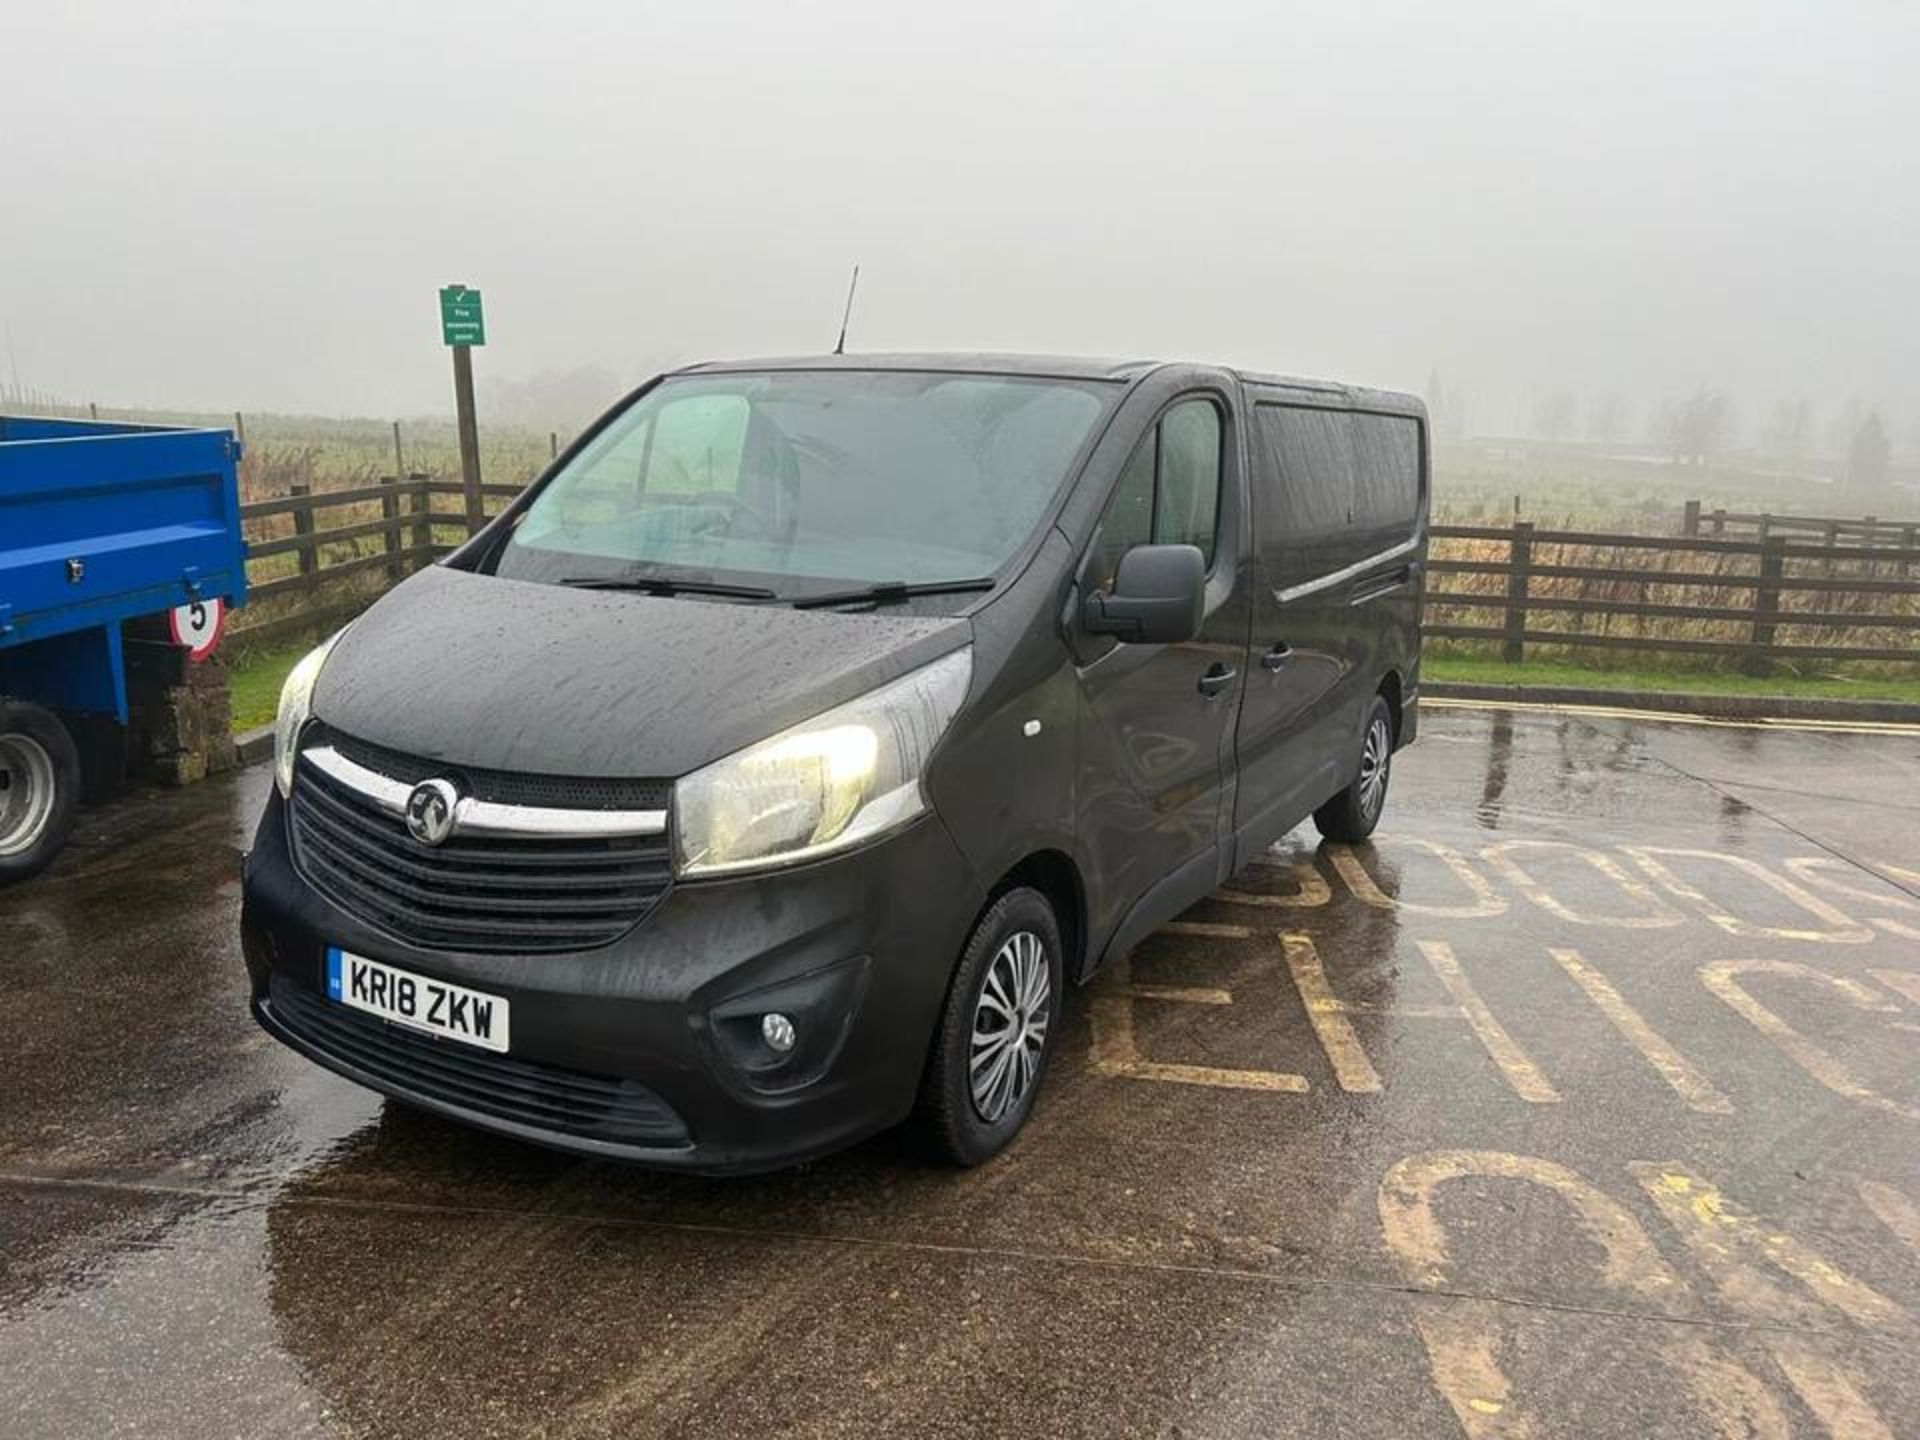 2018 VAUXHALL VIVARO SPORTIVE - 152K MILES- HPI CLEAR- READY FOR ACTION! - Image 9 of 10